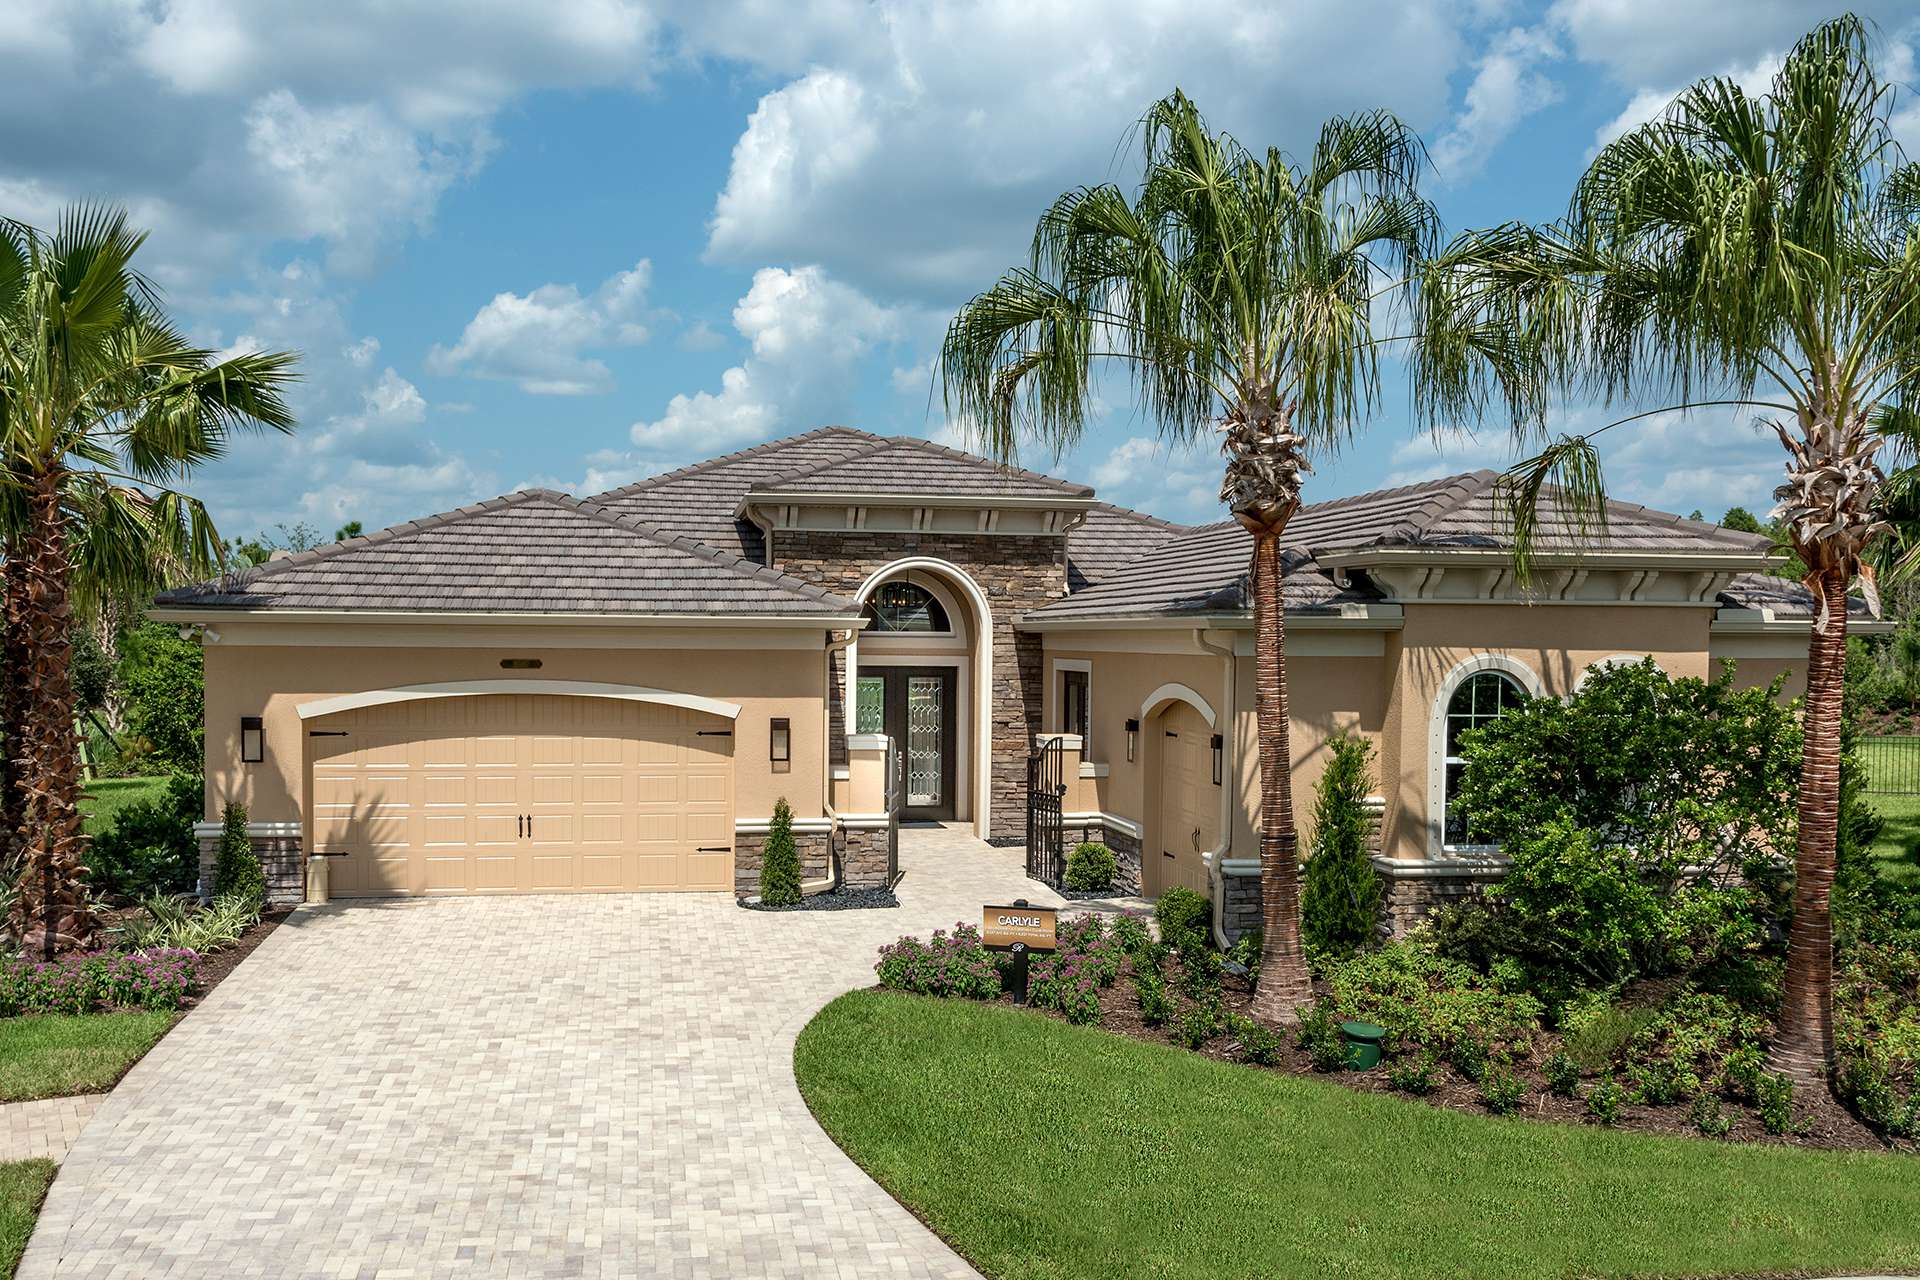 New Homes for Sale in Tampa Florida - GL Homes | Florida Real Estate